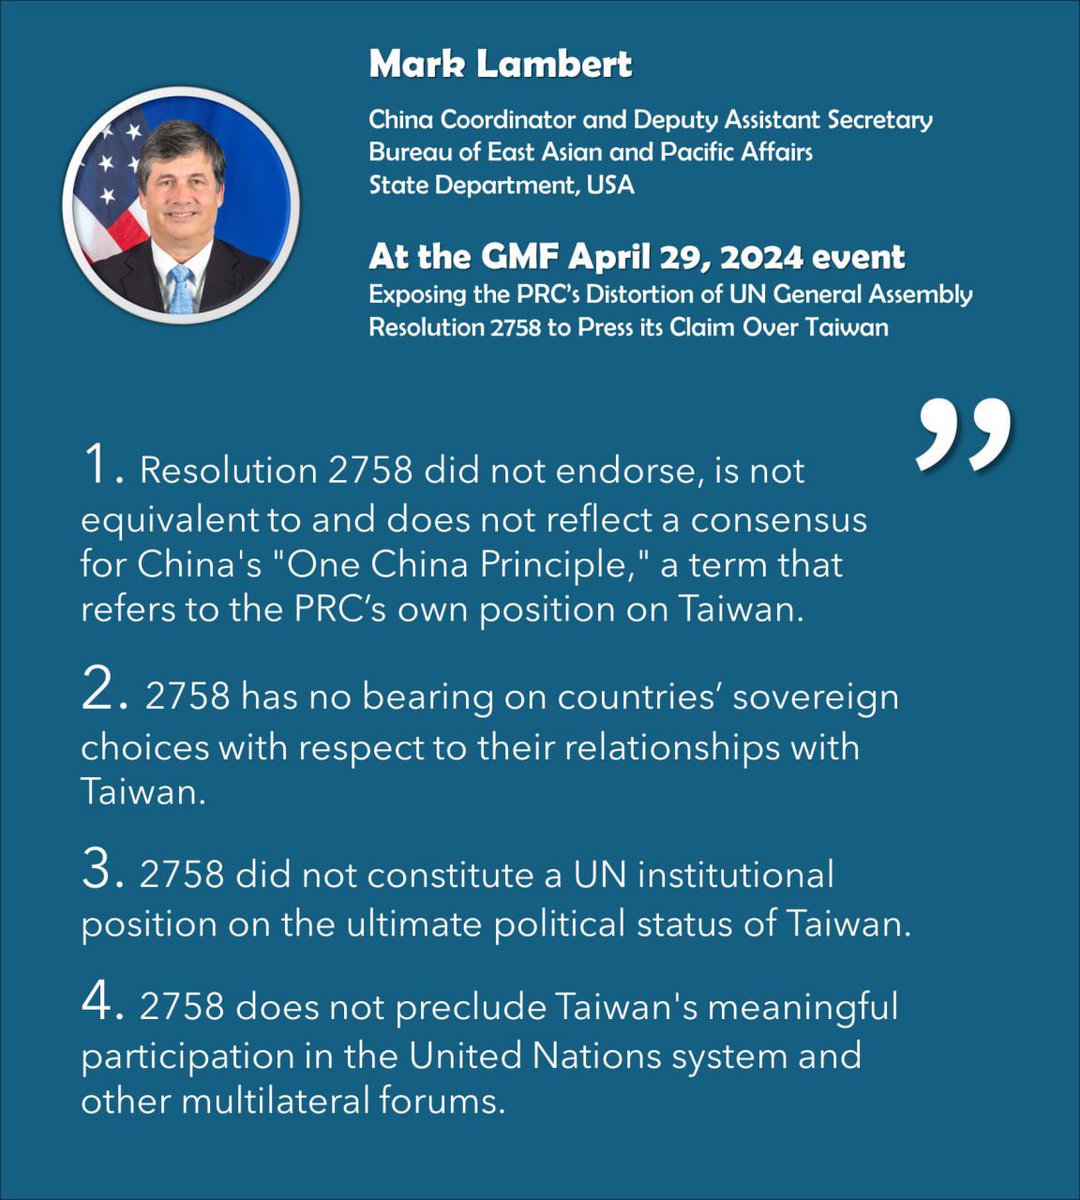 Thank you, DAS Lambert, for clarifying that #UNGA 2758 isn’t what the #PRC claims. It can’t exclude our int’l participation & qualify peace in the region as domestic affairs. Also, in no way can #China use it to threaten #Taiwan militarily which clearly violates #UN Charter. JW